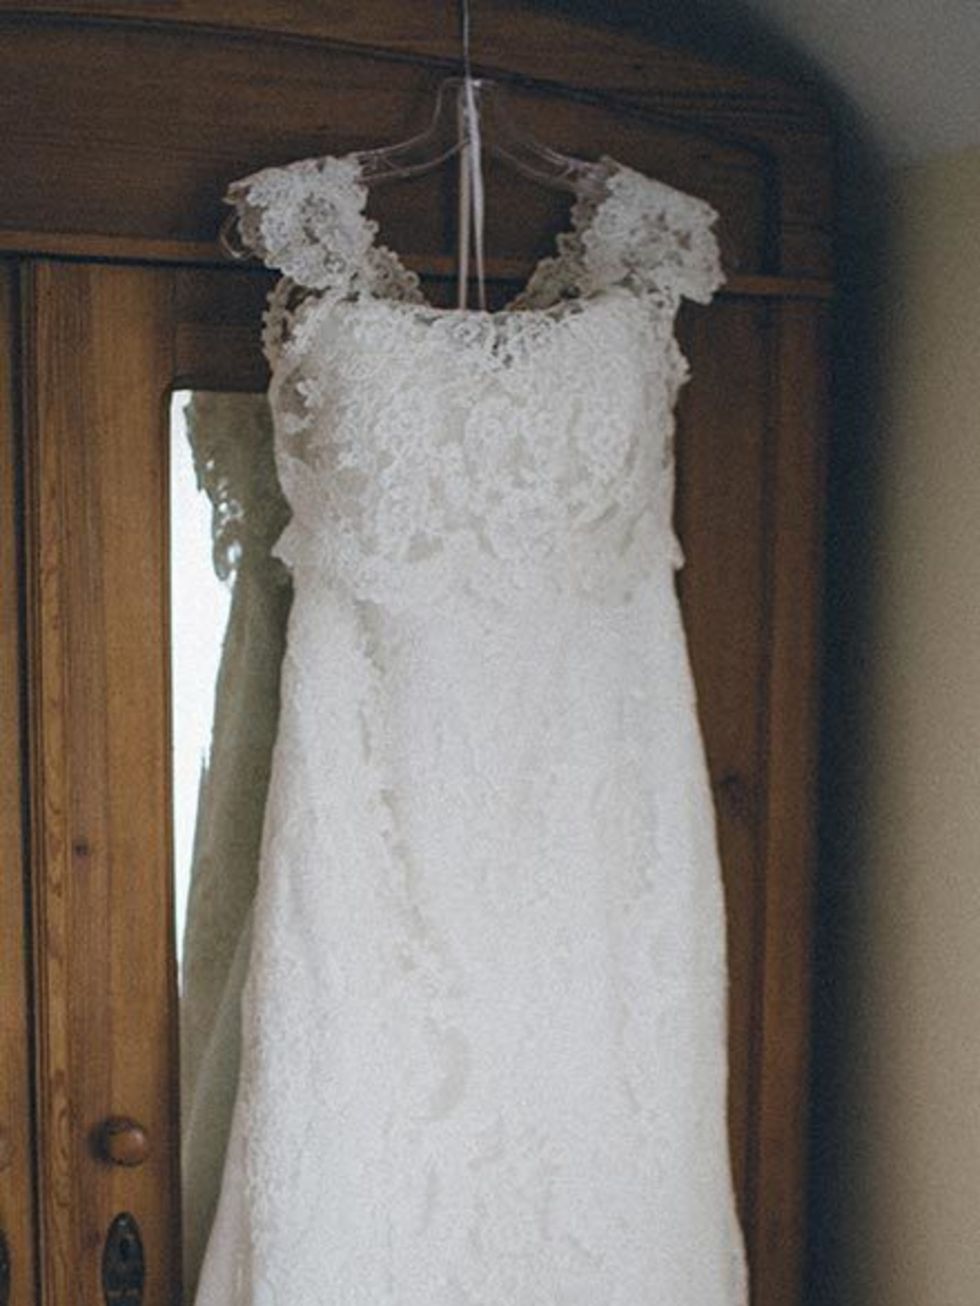 <p>After some searching I found my wedding dress in a beautiful bridal boutique in rural Shropshire, <a href="http://www.shropshirebrides.co.uk/" target="_blank">Shropshire Country Brides</a>.</p>